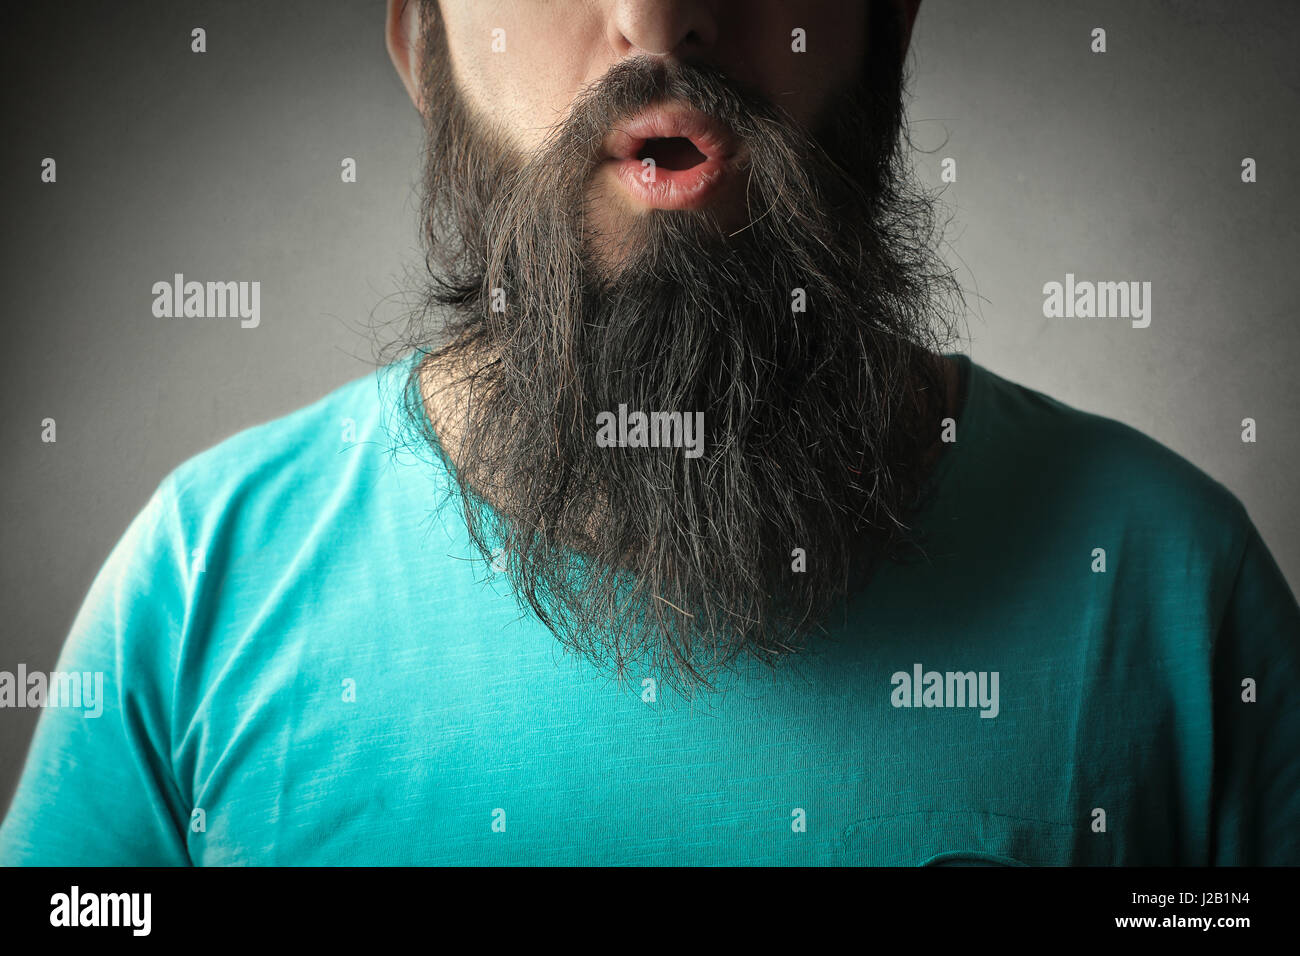 Bearded man with opened mouth Stock Photo